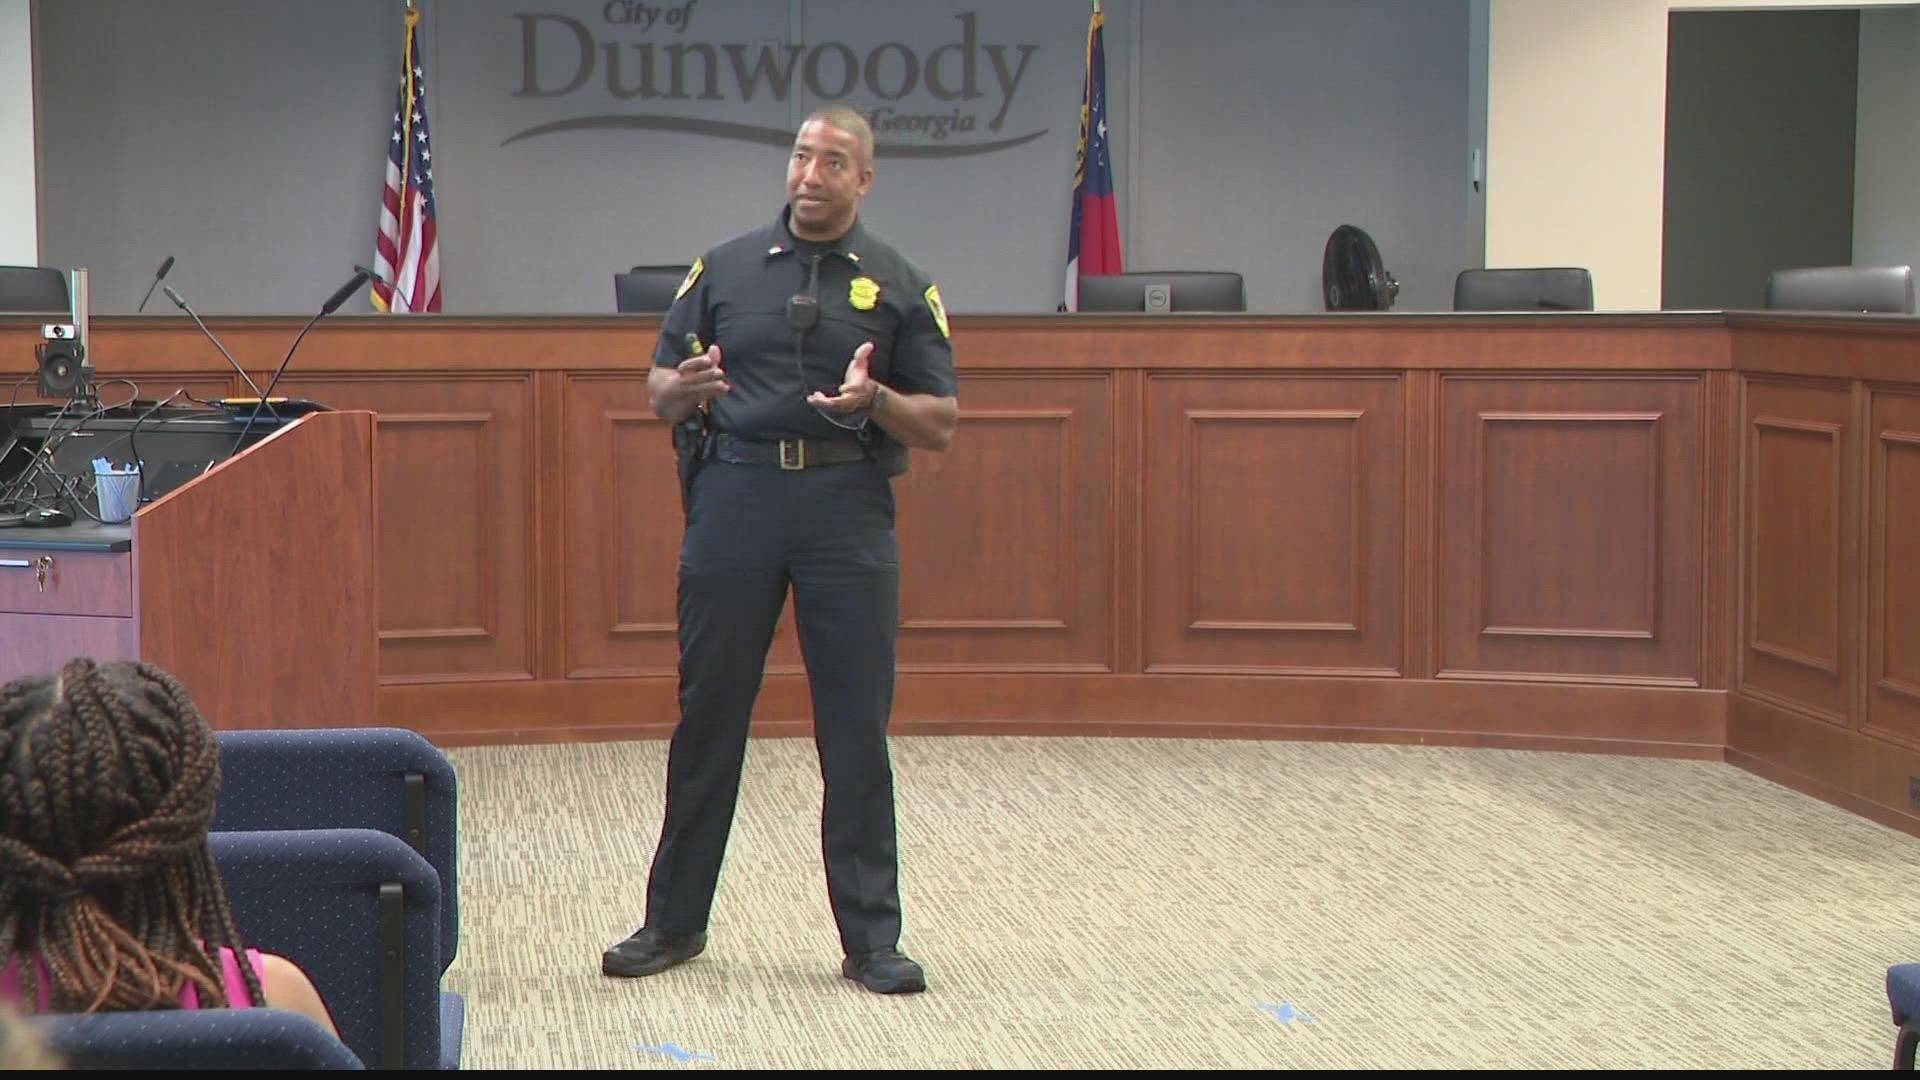 With the uptick in mass shootings, the Dunwoody Police Department wants everyone to be prepared if they ever find themselves in the middle of a crisis.